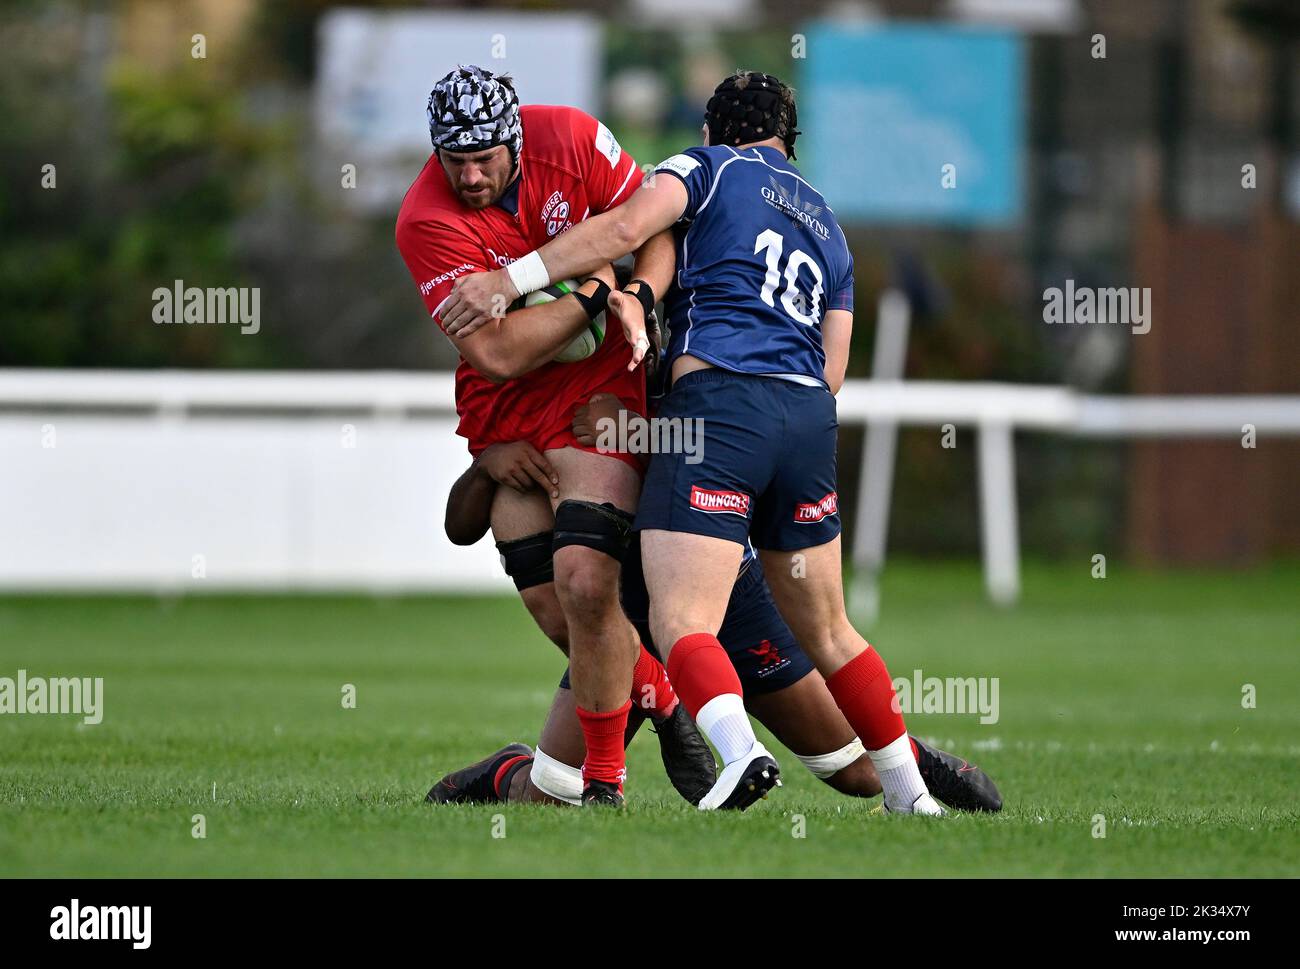 Richmond, United Kingdom. 24th Sep, 2022. Championship Rugby. London Scottish V Jersey Reds. The Richmond Athletic Ground. Richmond. Alun Lawrence (Jersey Reds) is tackled by Harry Sheppard (London Scottish) during the London Scottish V Jersey Reds championship rugby match. Credit: Sport In Pictures/Alamy Live News Stock Photo